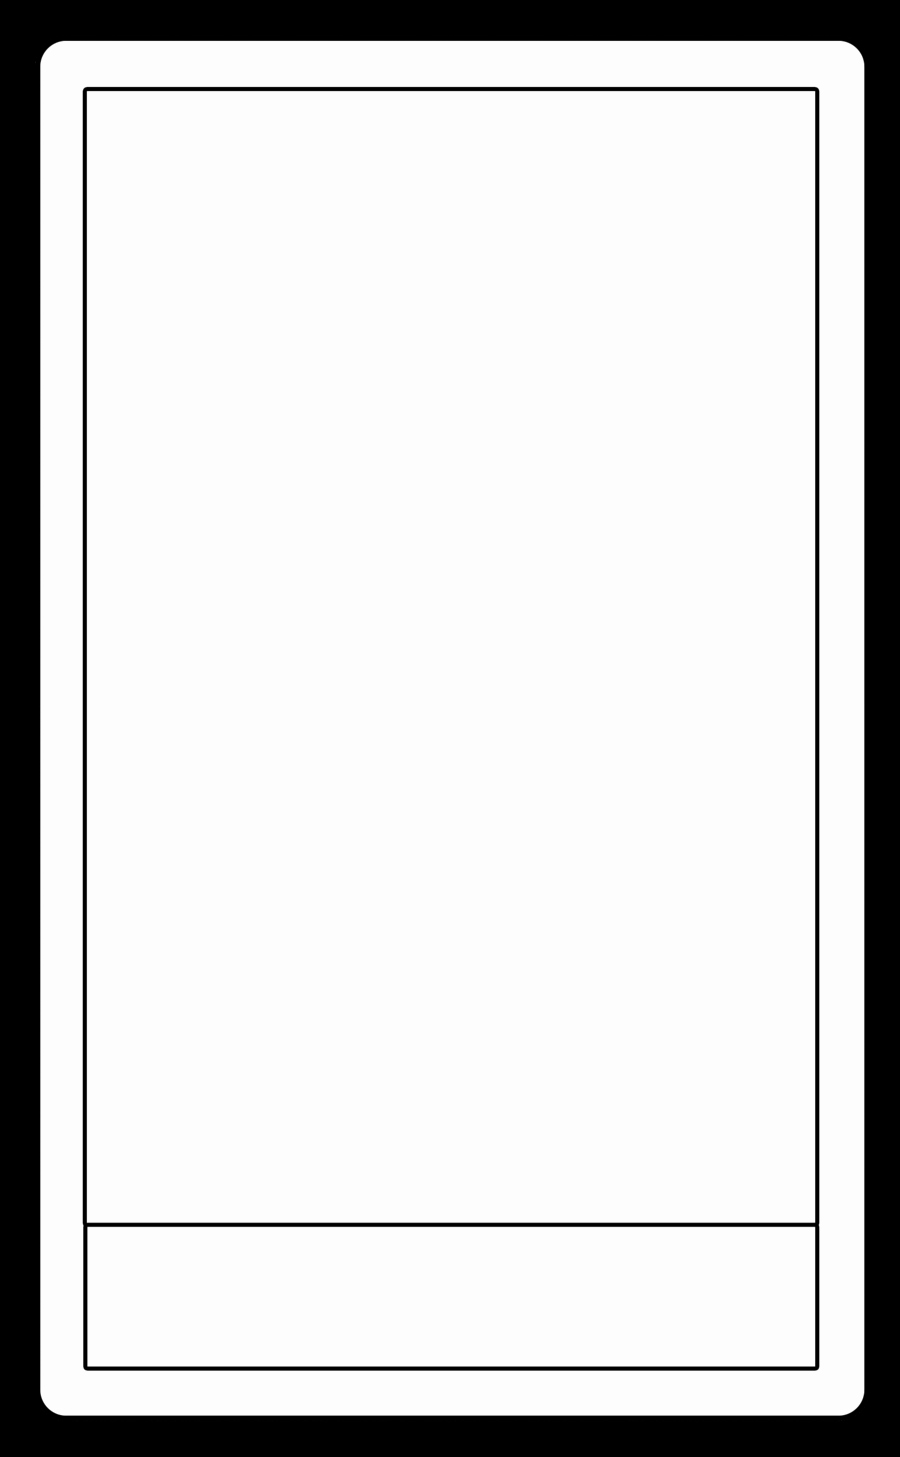 Tarot Card Template by Arianod On Deviantart